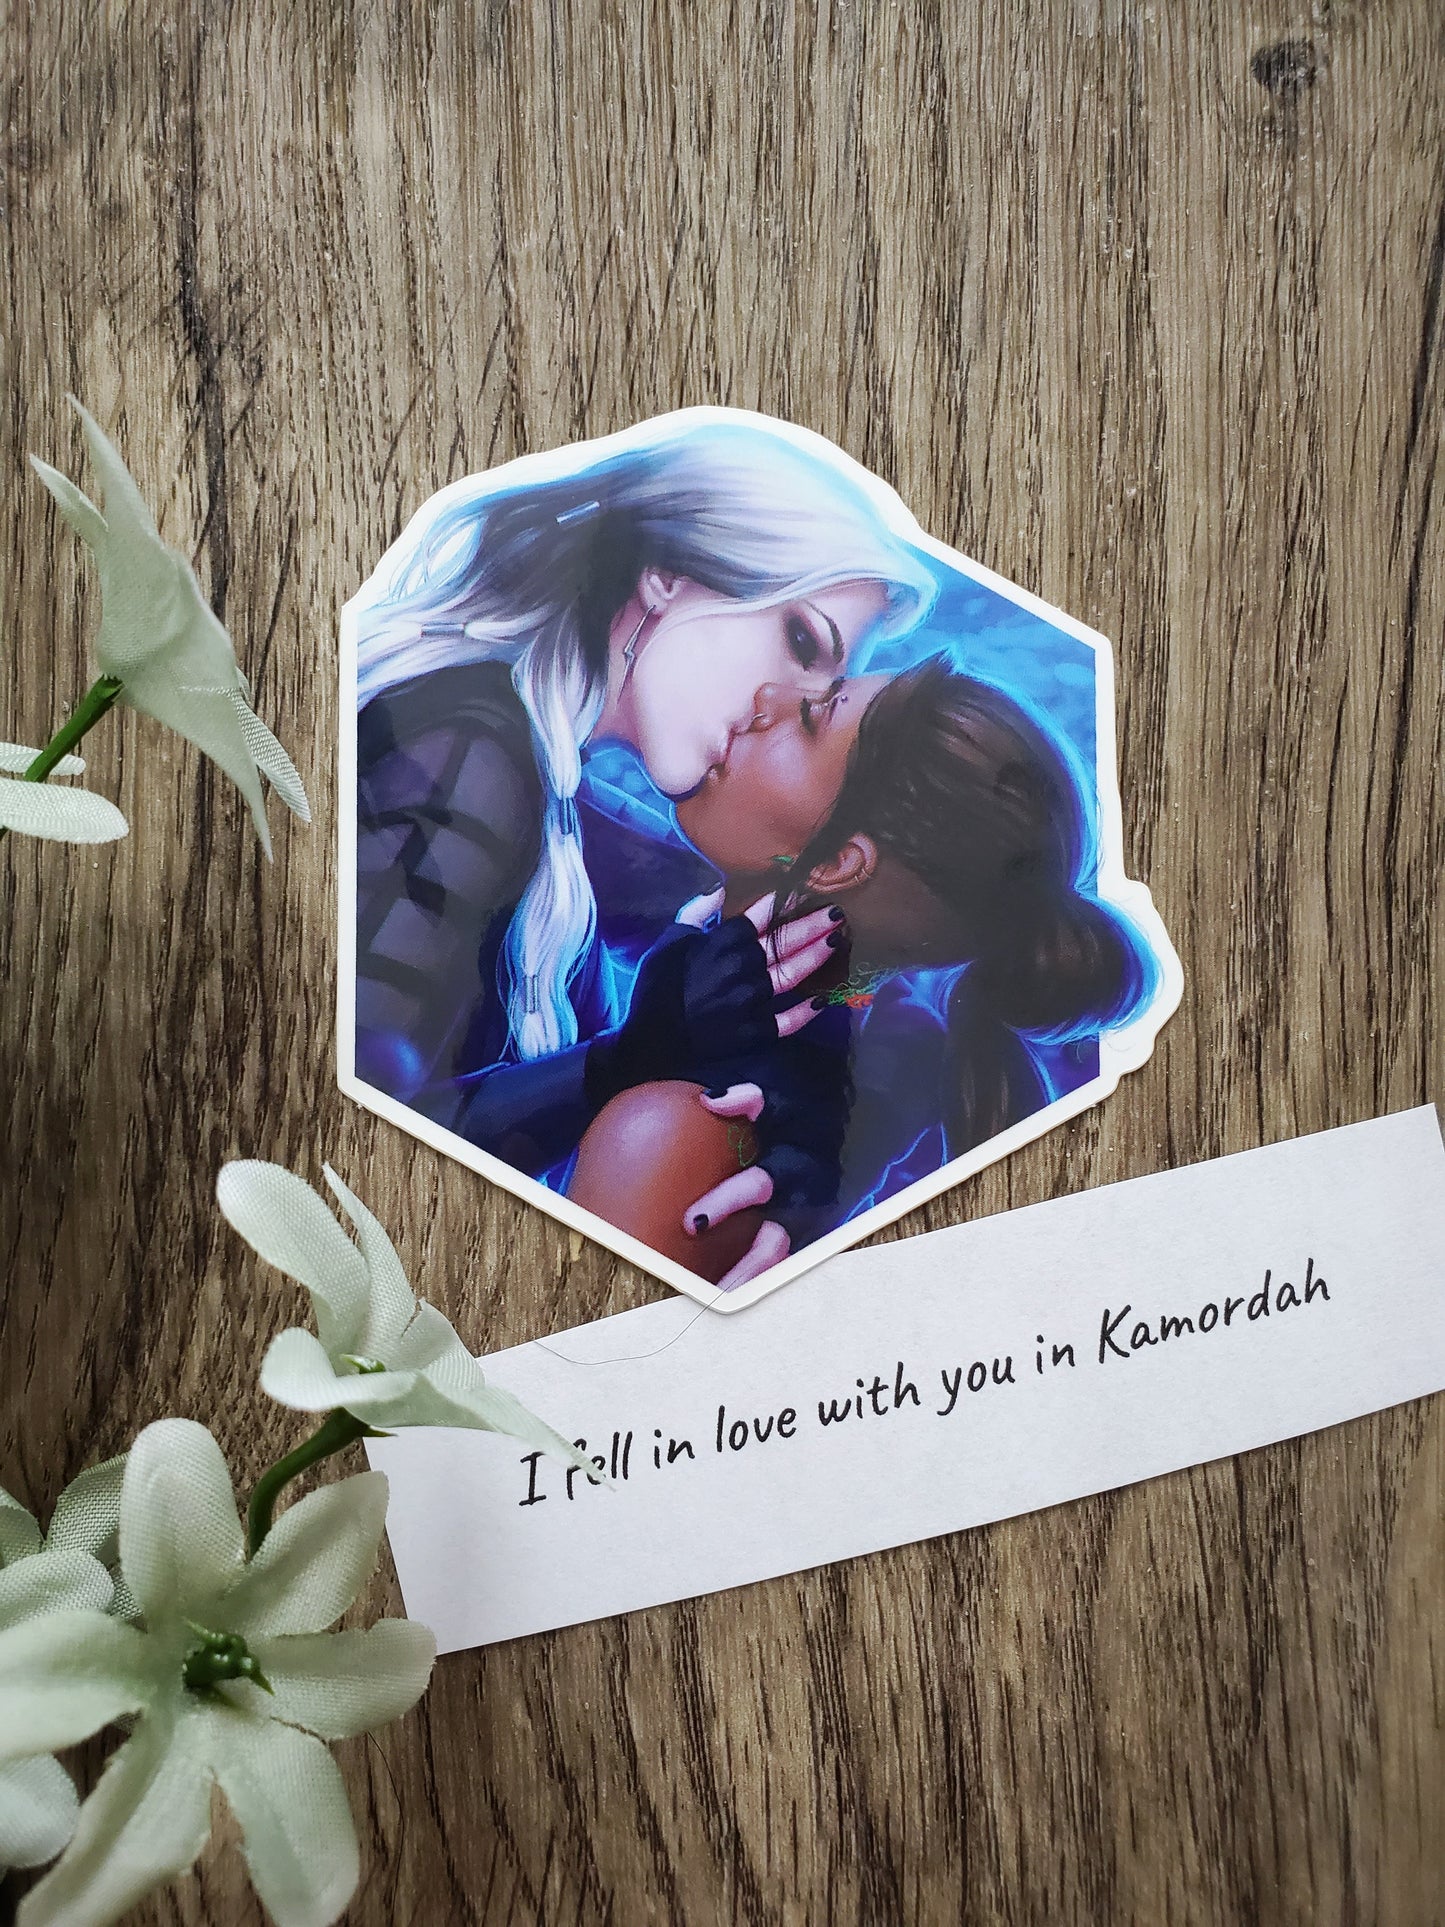 "I fell in love with you in Kamordah" - Sticker